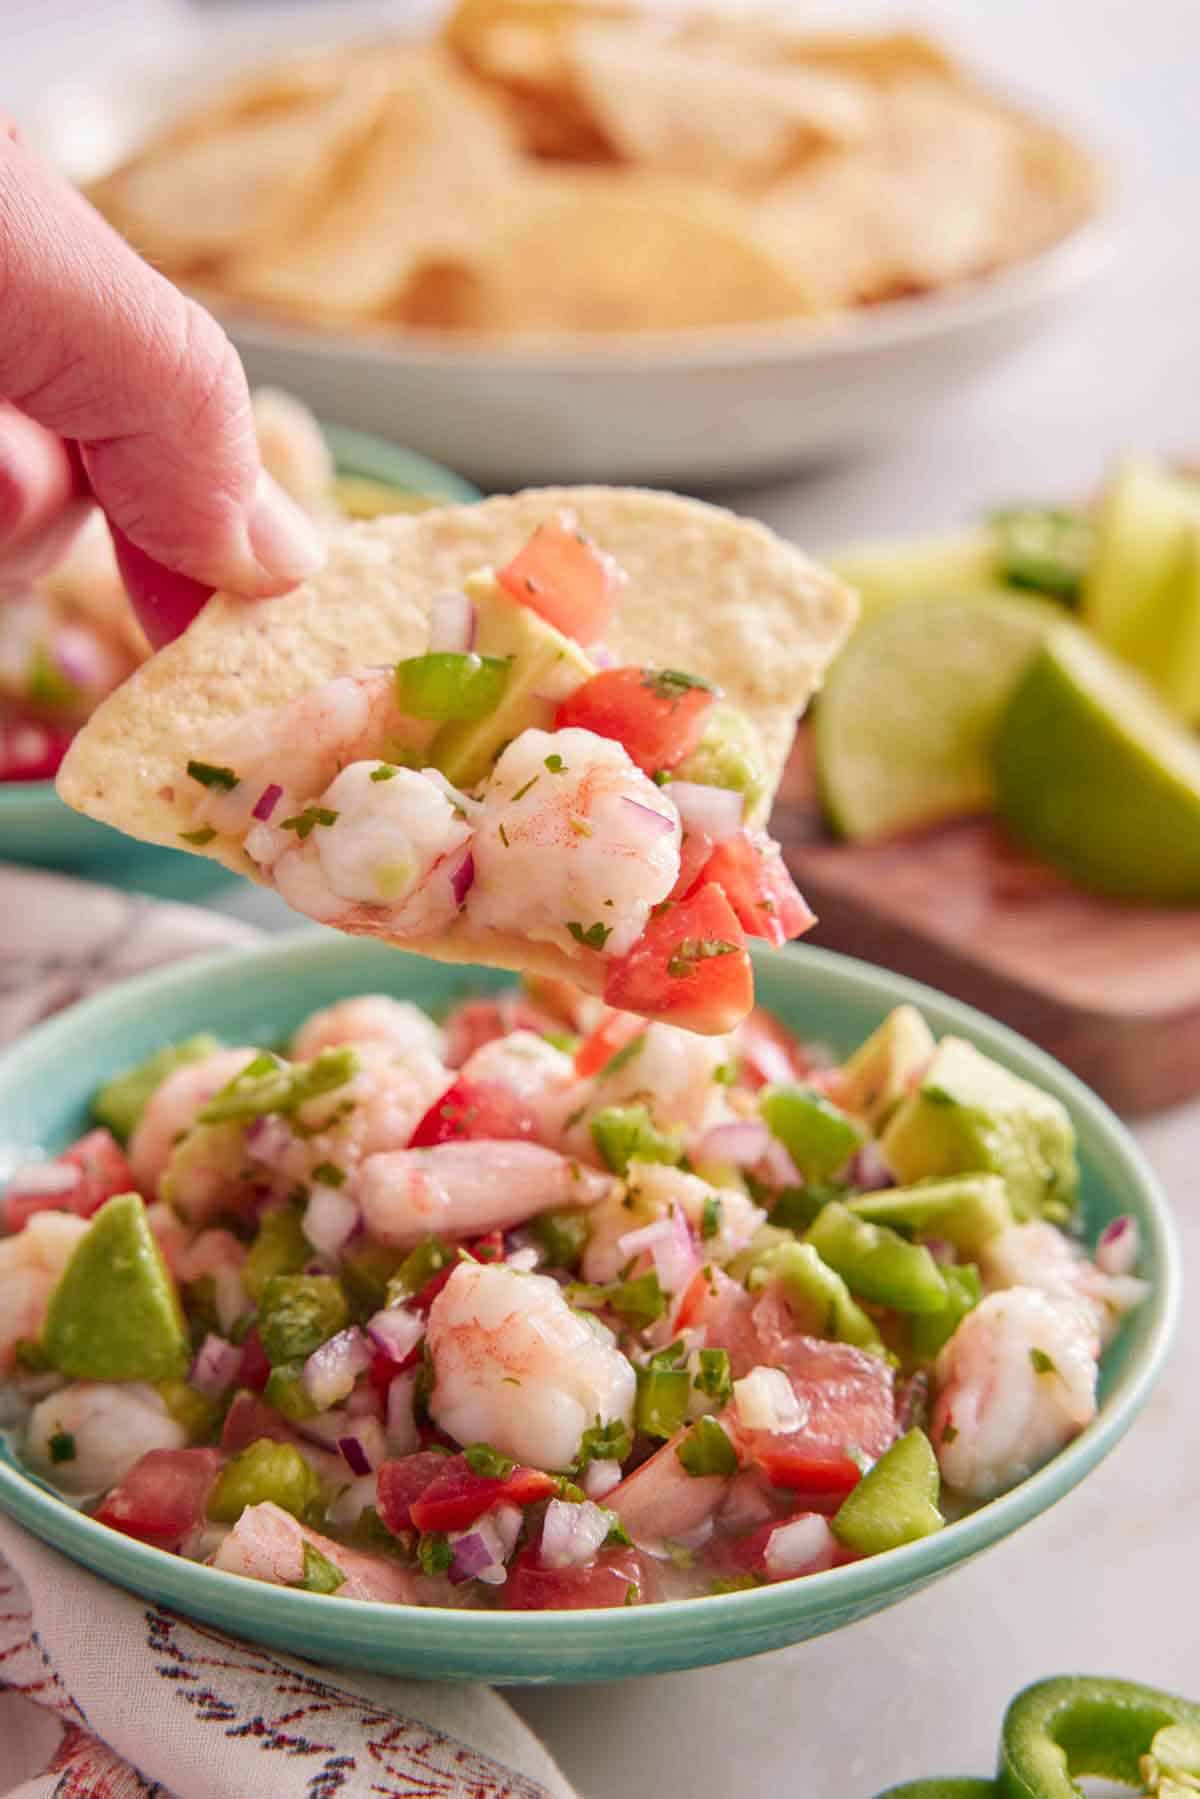 A tortilla chip lifting shrimp ceviche from a bowl.